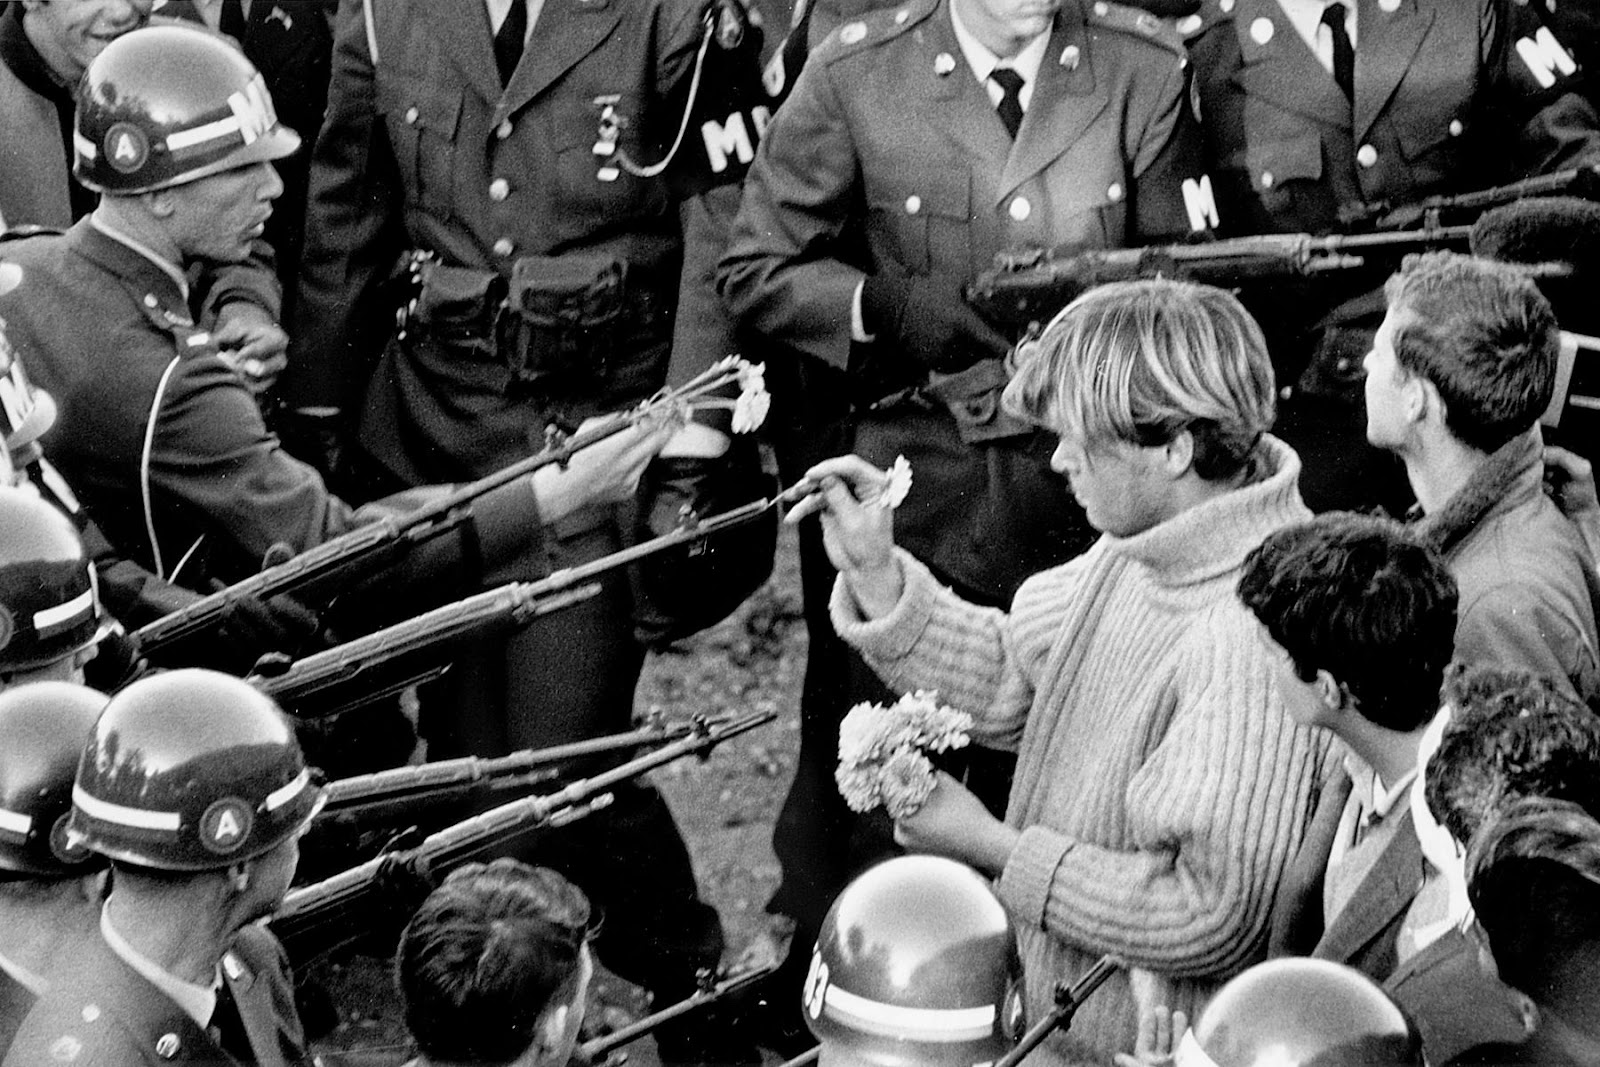 Black and white photograph featuring a group of White soldiers holding rifles, surrounding and pointed toward a group of young people, casually dressed. A young White man holds flowers in one hand as he places the stem of a single flower into the barrel of a soldier’s gun.